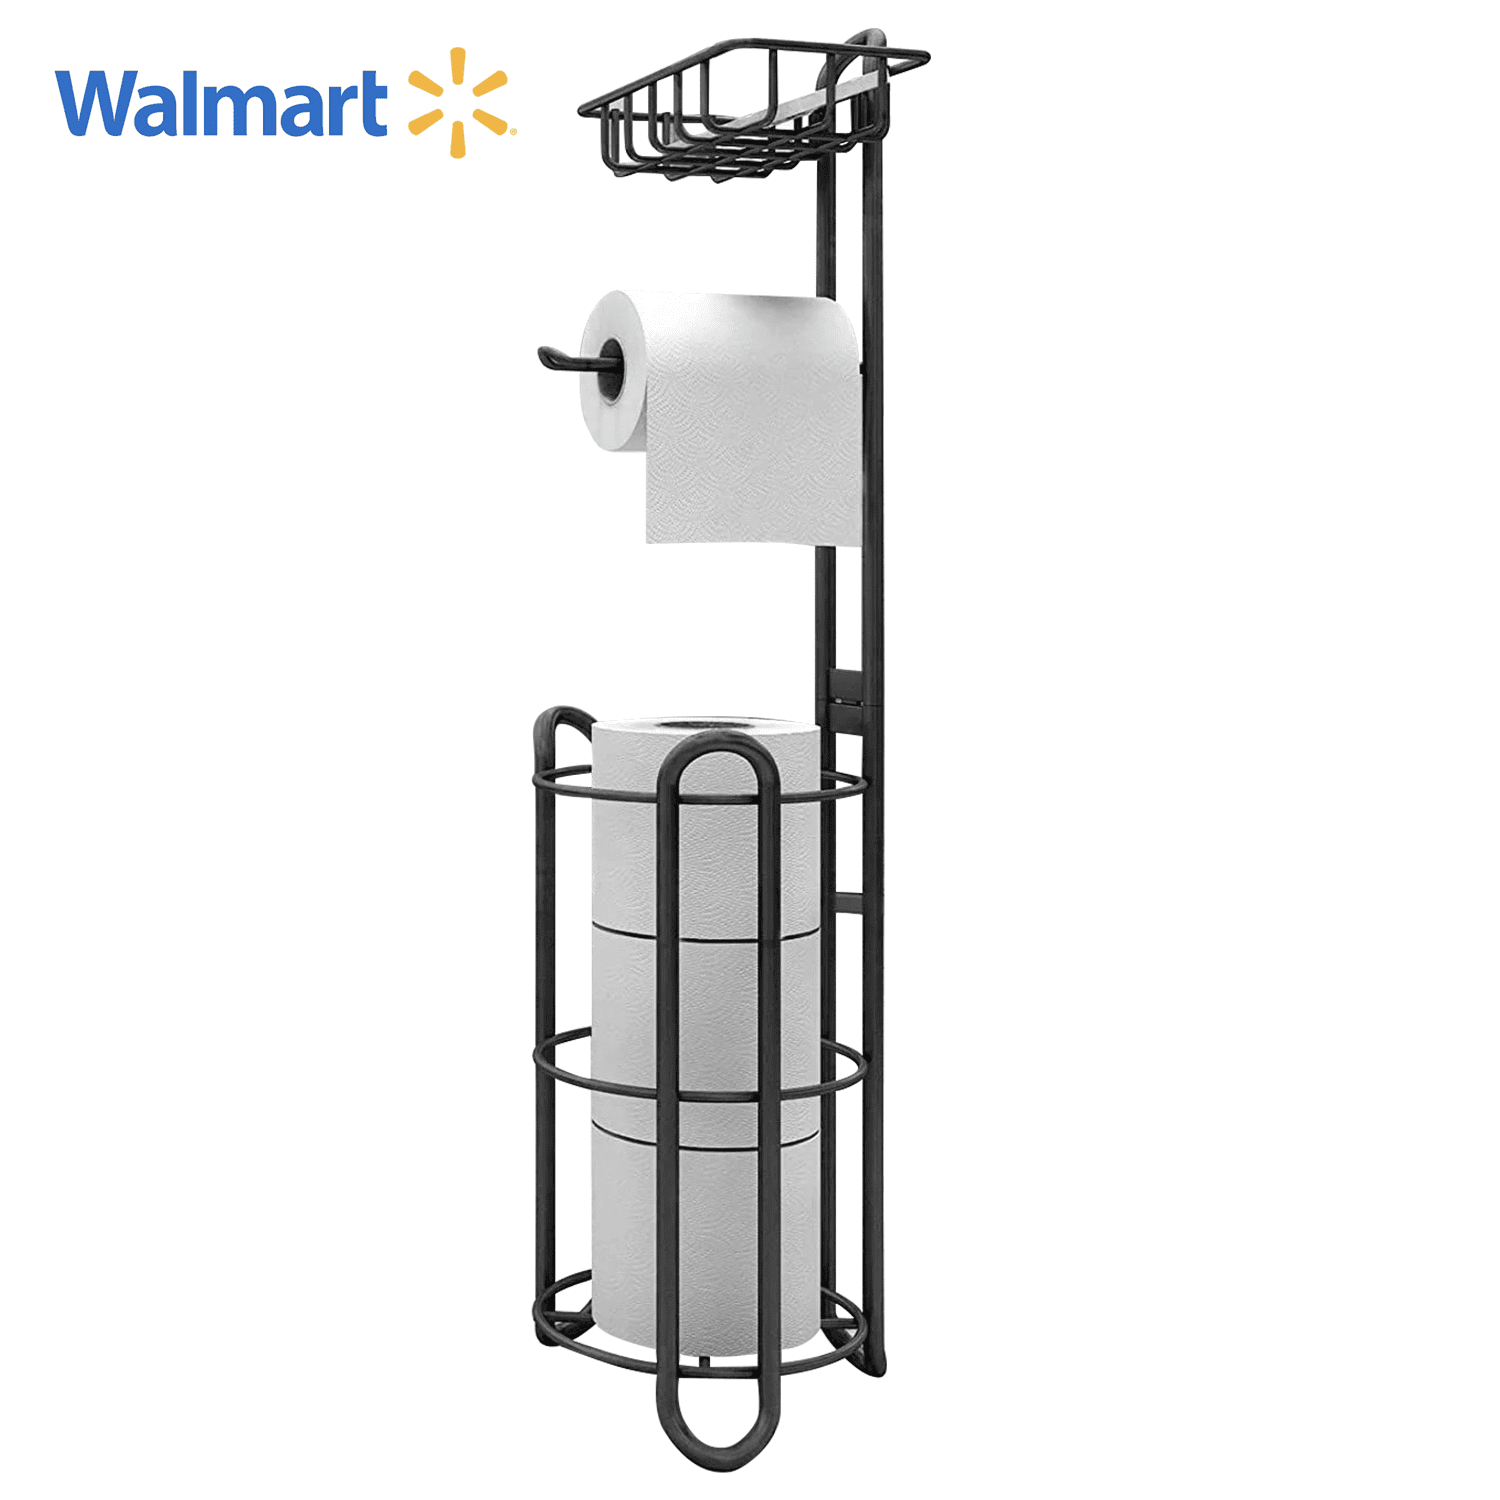 Werseon Toilet Paper Holder with Large Top Shelf, Toilet Paper